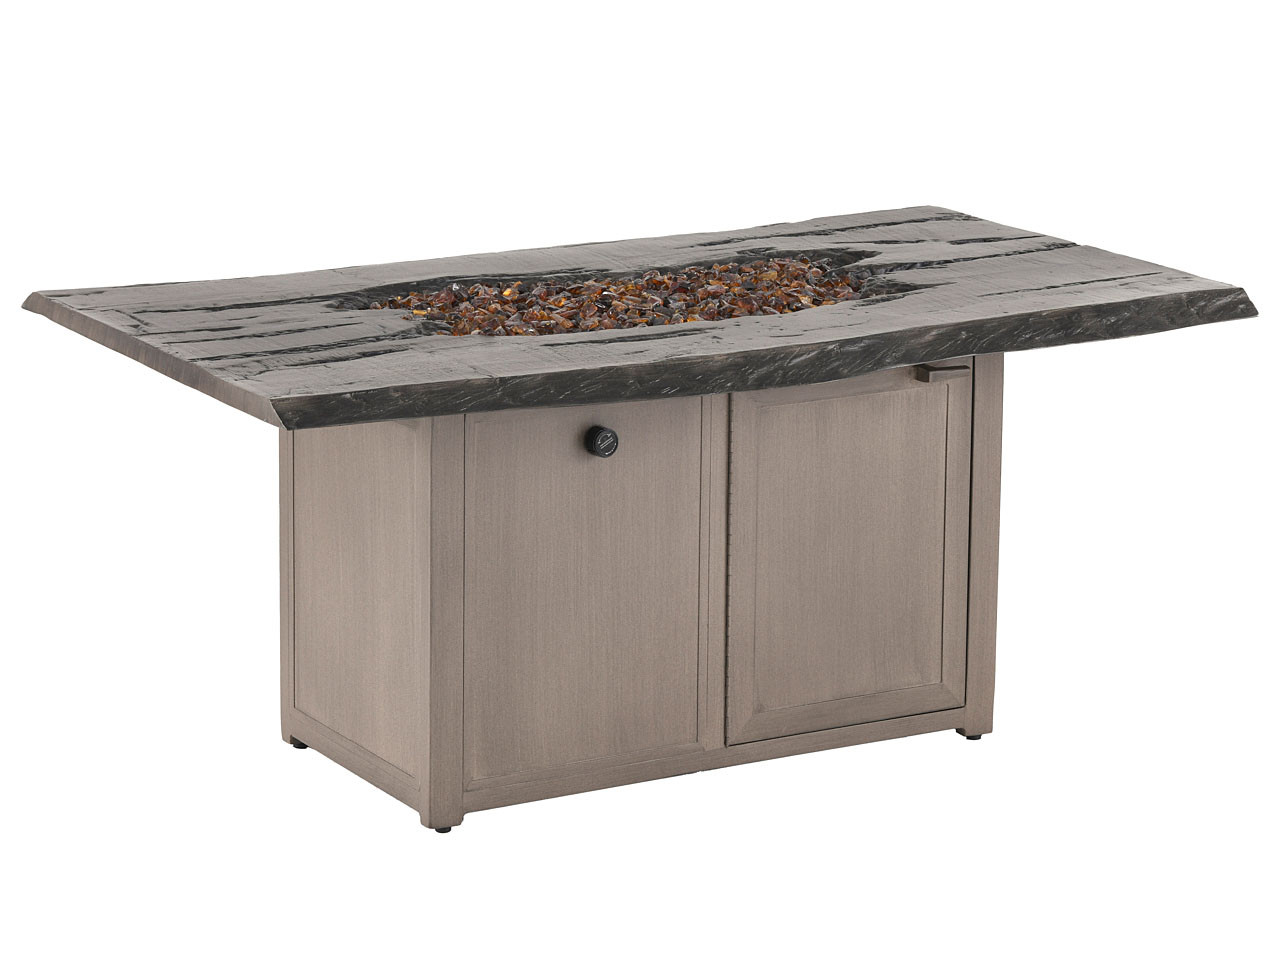 Roma Weathered Wood Cast Aluminum 54 x 29 in. Fire Pit